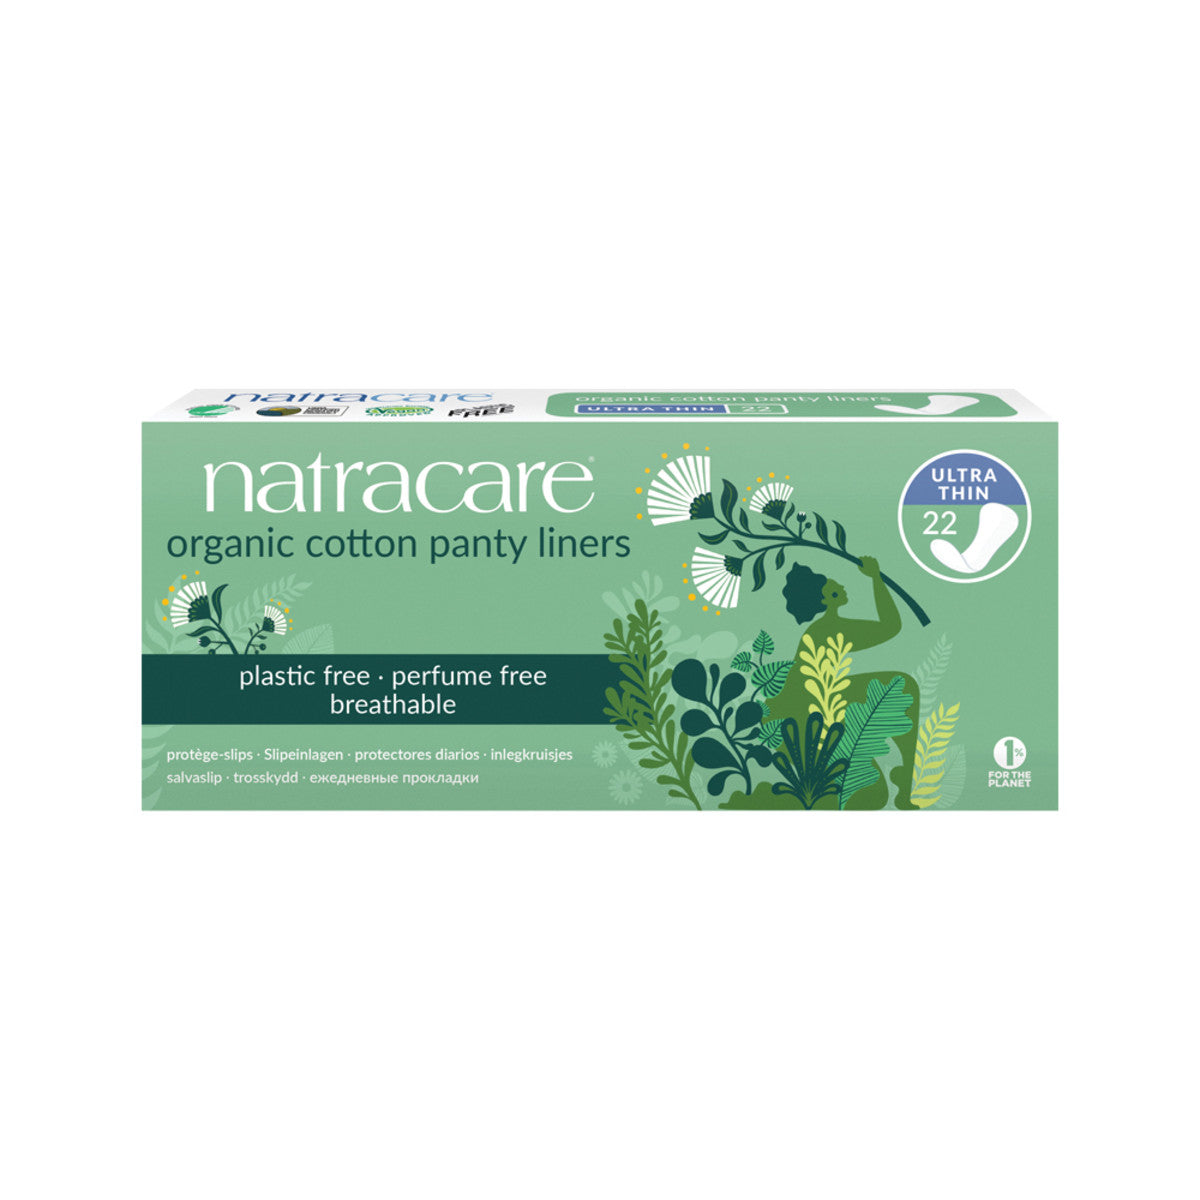 Natracare - Panty Liners Ultra Thin with Organic Cotton Cover